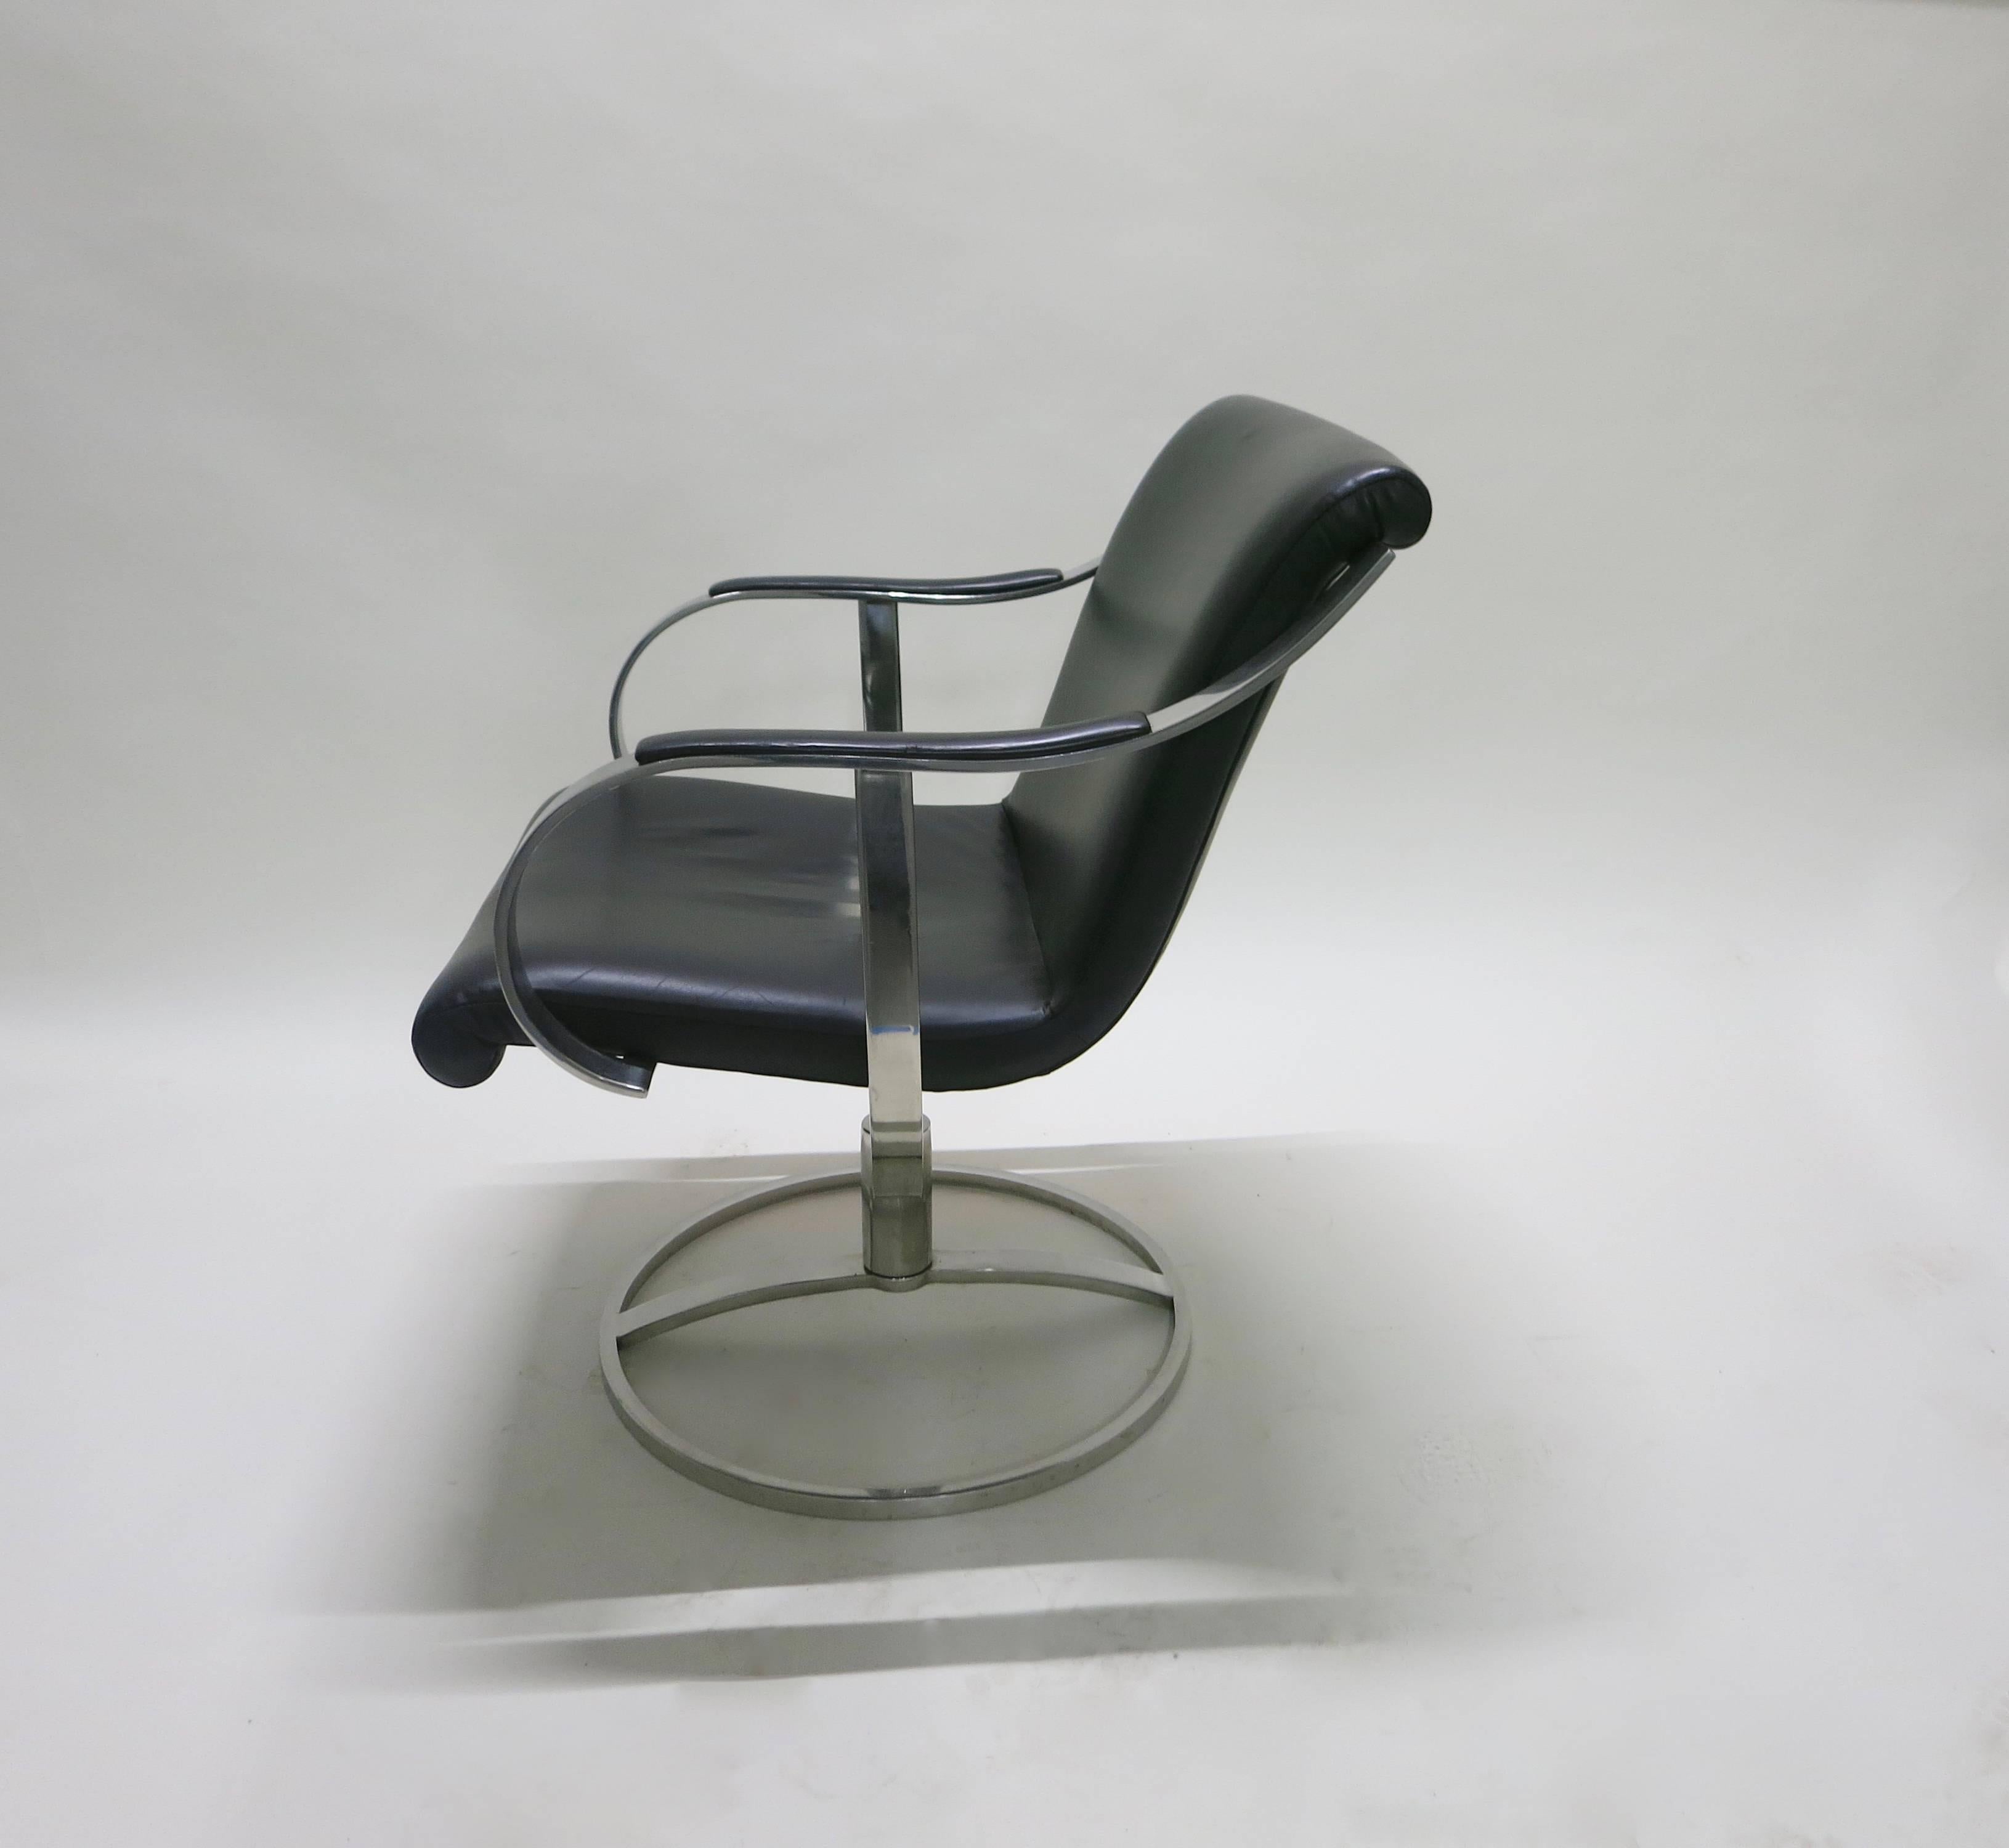 Pair of Swivel Chairs by Gardner Leaver for Steelcase, circa 1965, American 1